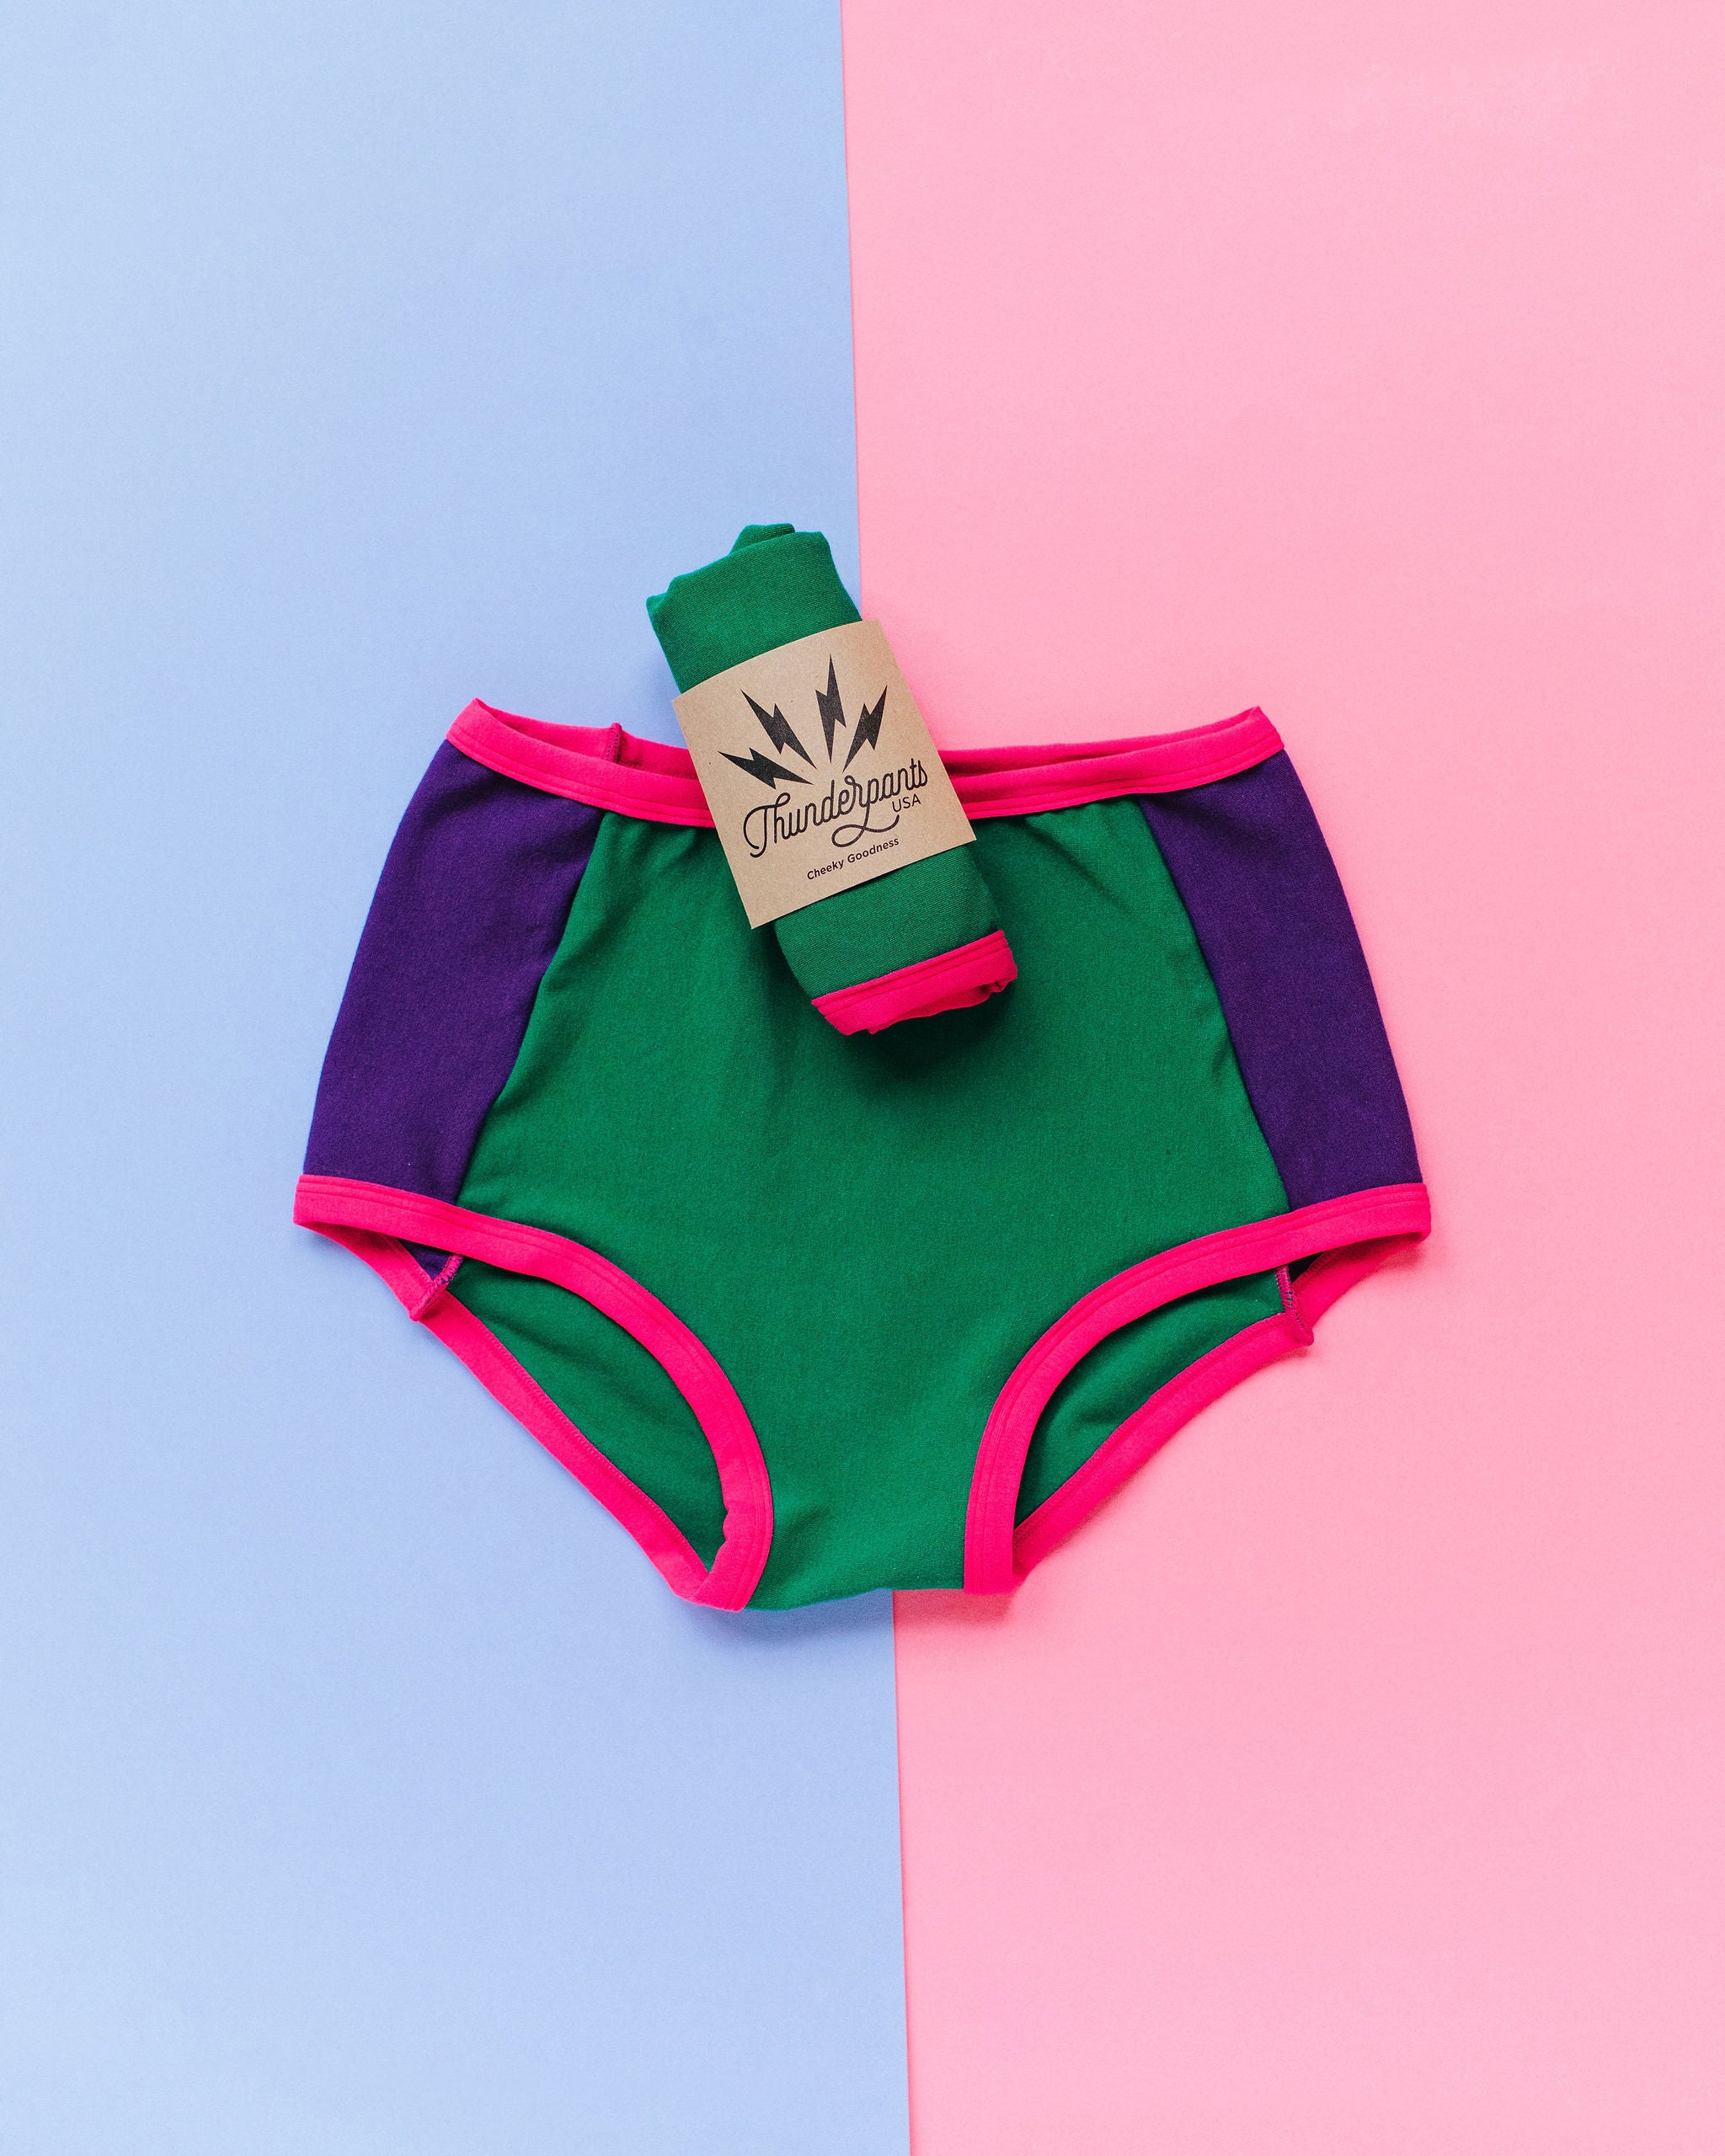 Flat lay of Thunderpants Original Panel Pants style underwear in 90's Dream - purple sides, green middle, and pink binding.